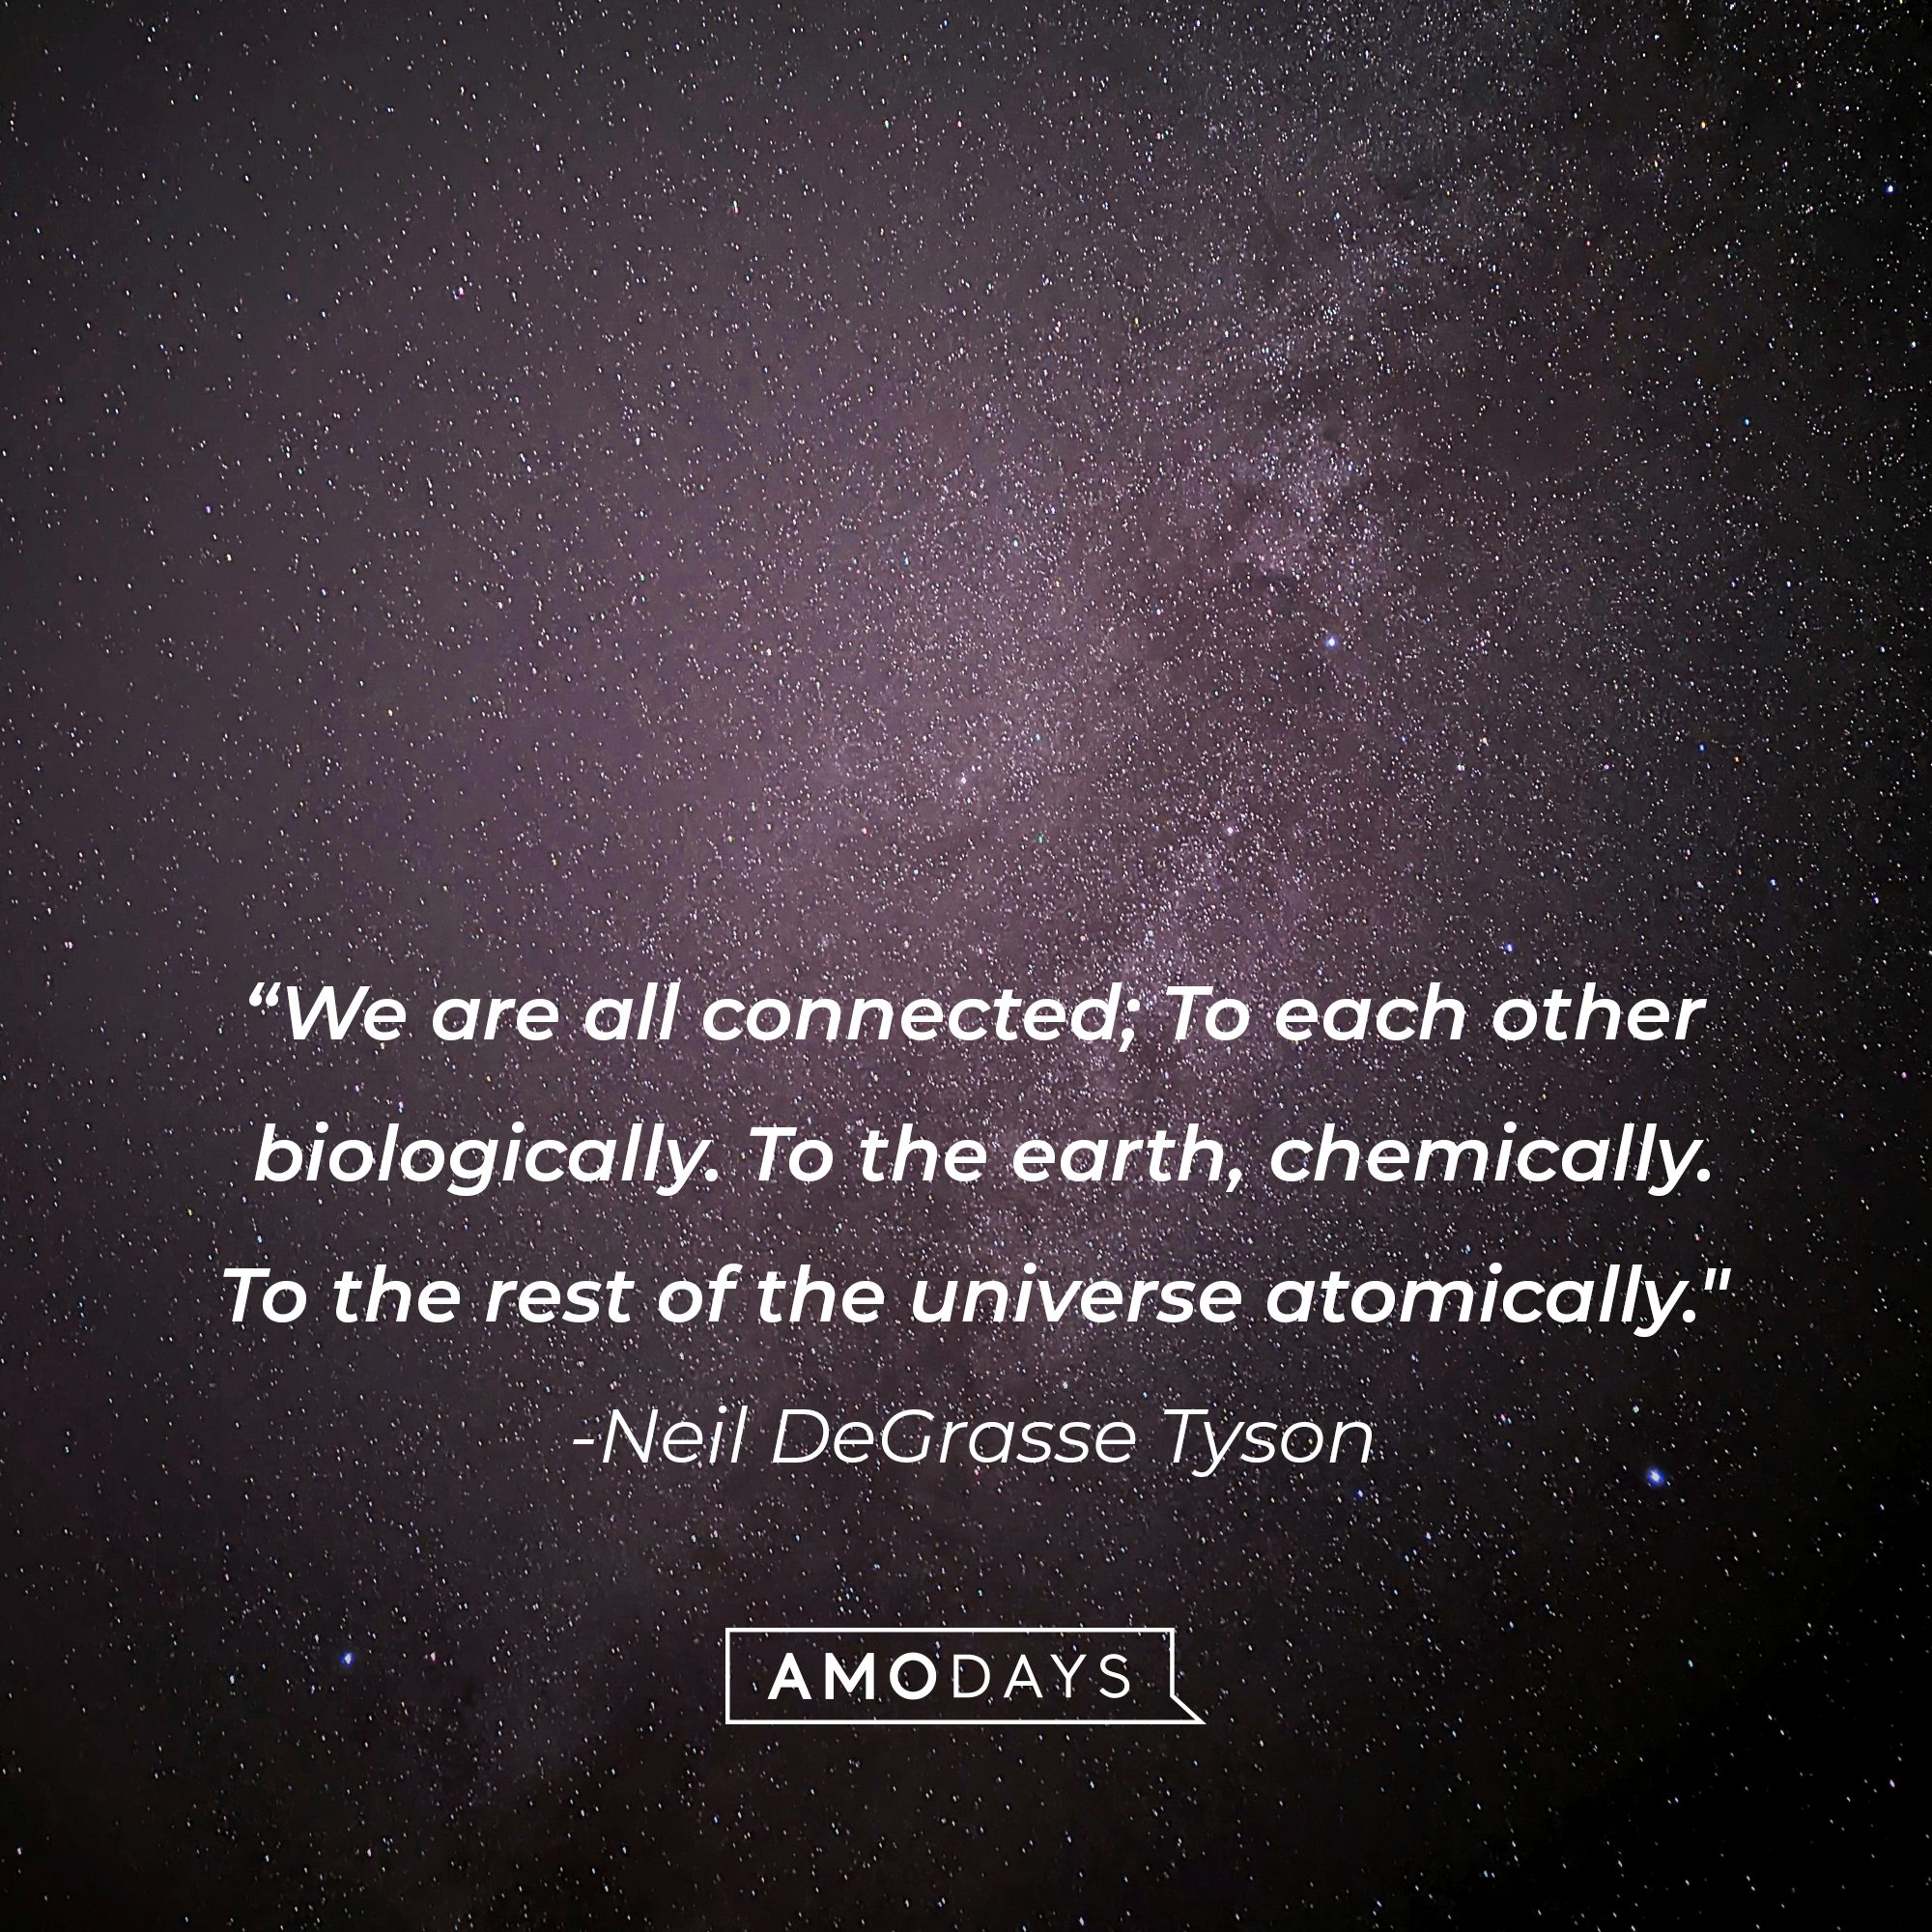 Neil DeGrasse Tyson’s quote: "We are all connected; To each other biologically. To the earth, chemically. To the rest of the universe atomically." |  Image: AmoDays   